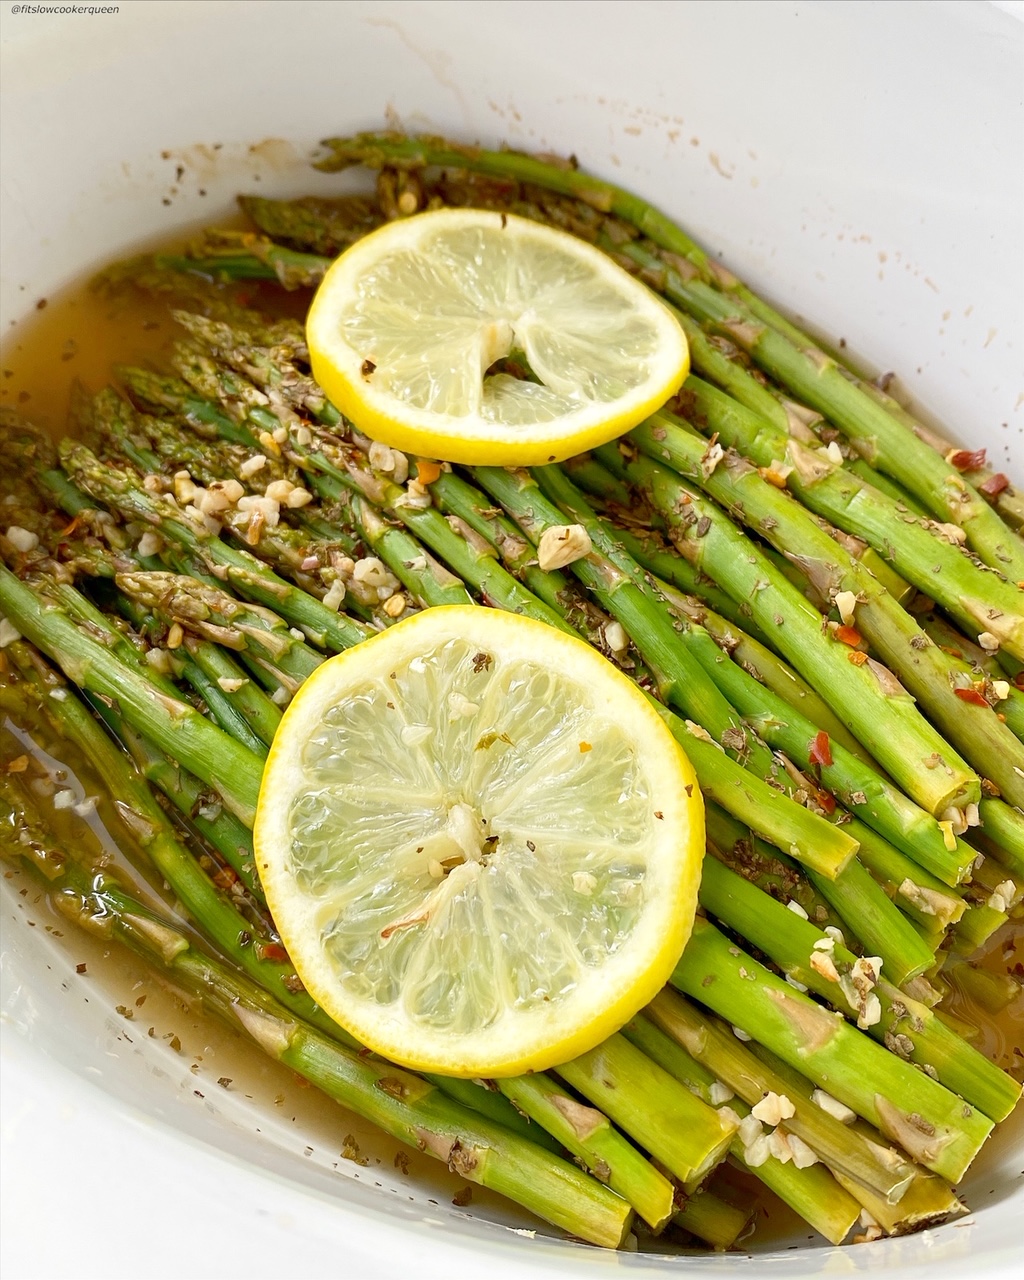 another close up of cooked asparagus in a bowl topped with seasonings and garlic